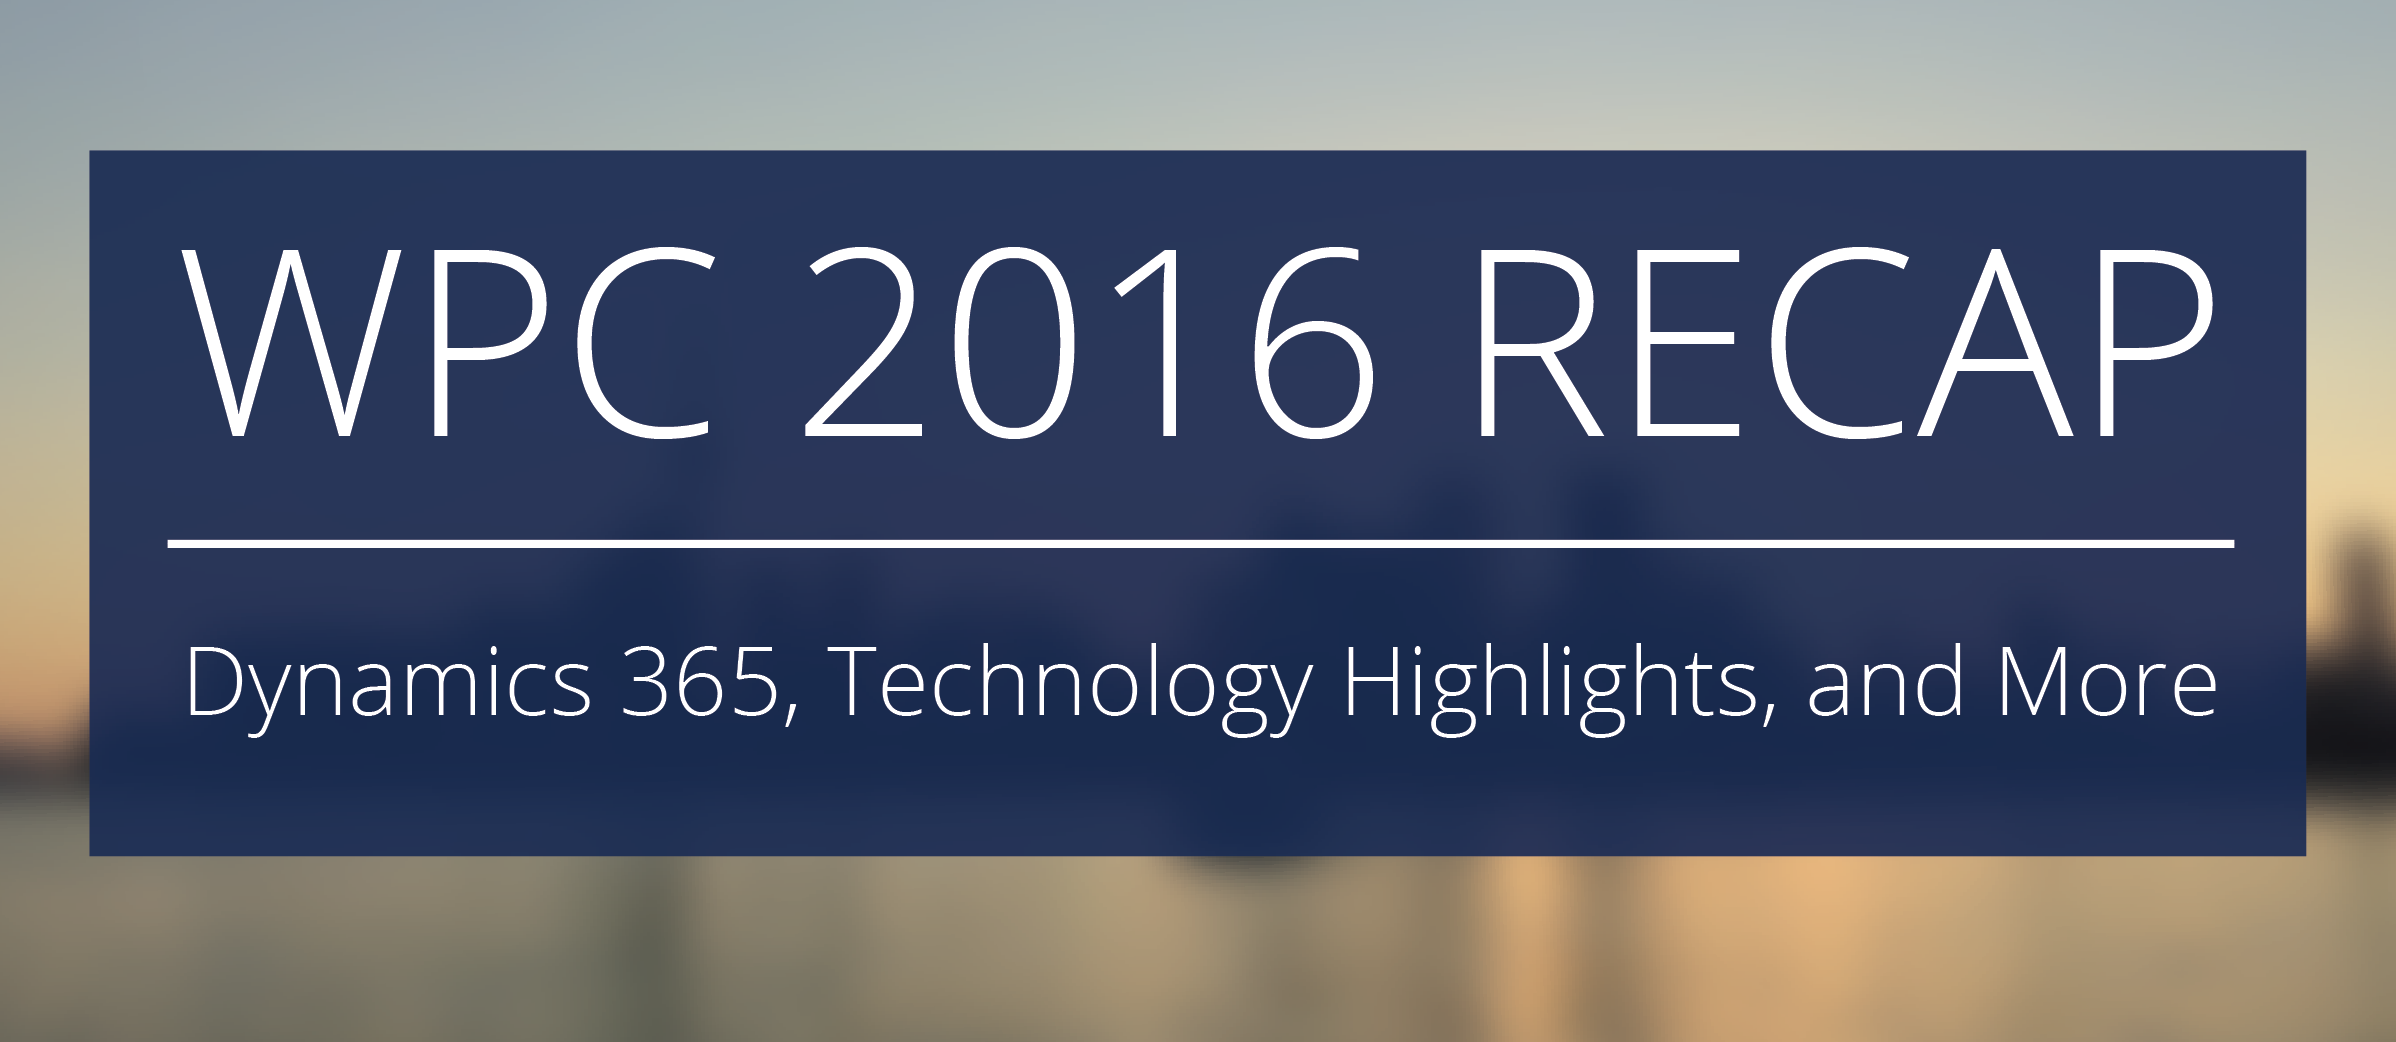 WPC 2016 Recap - Dynamics 365, Technology Highlights, and More